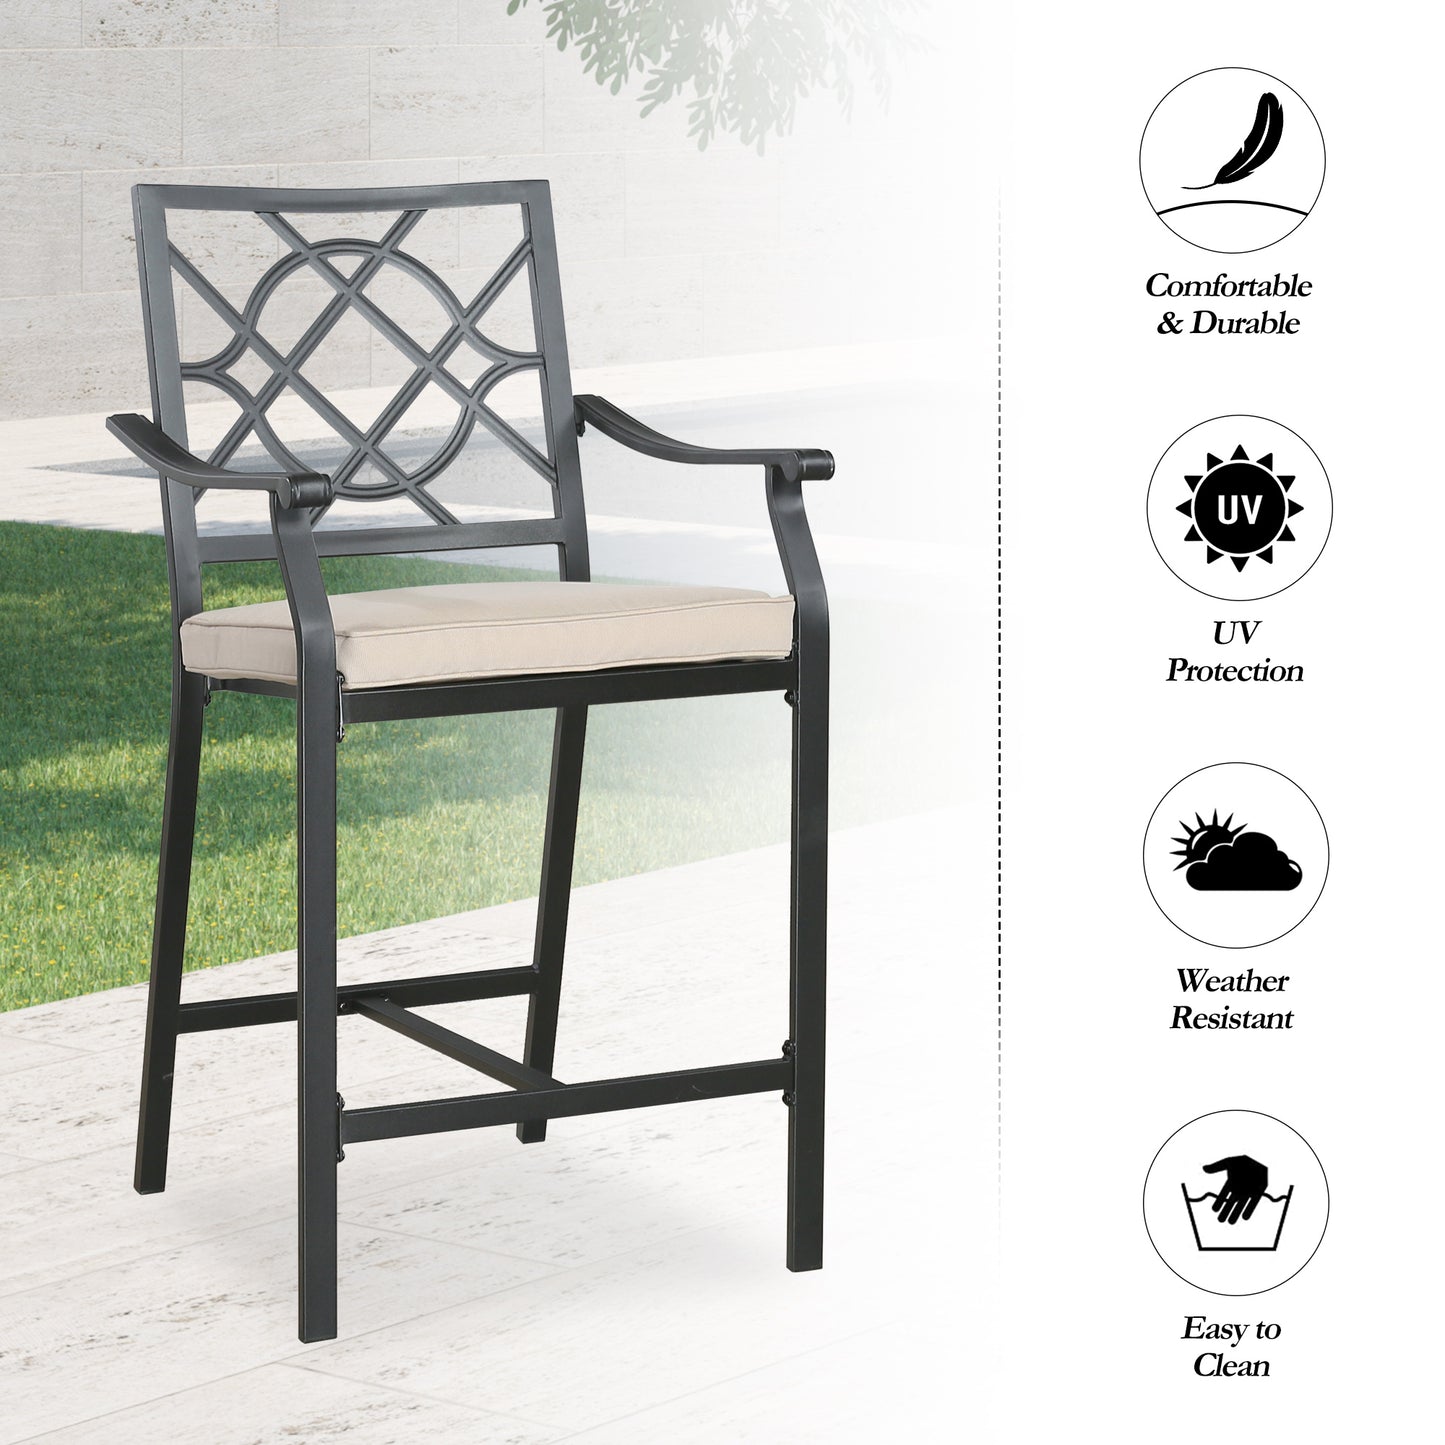 Outdoor 3 Pieces Patio Bar Height Dining Set with Square Steel Bar Table and Bar Stools with Beige Seat Cushions